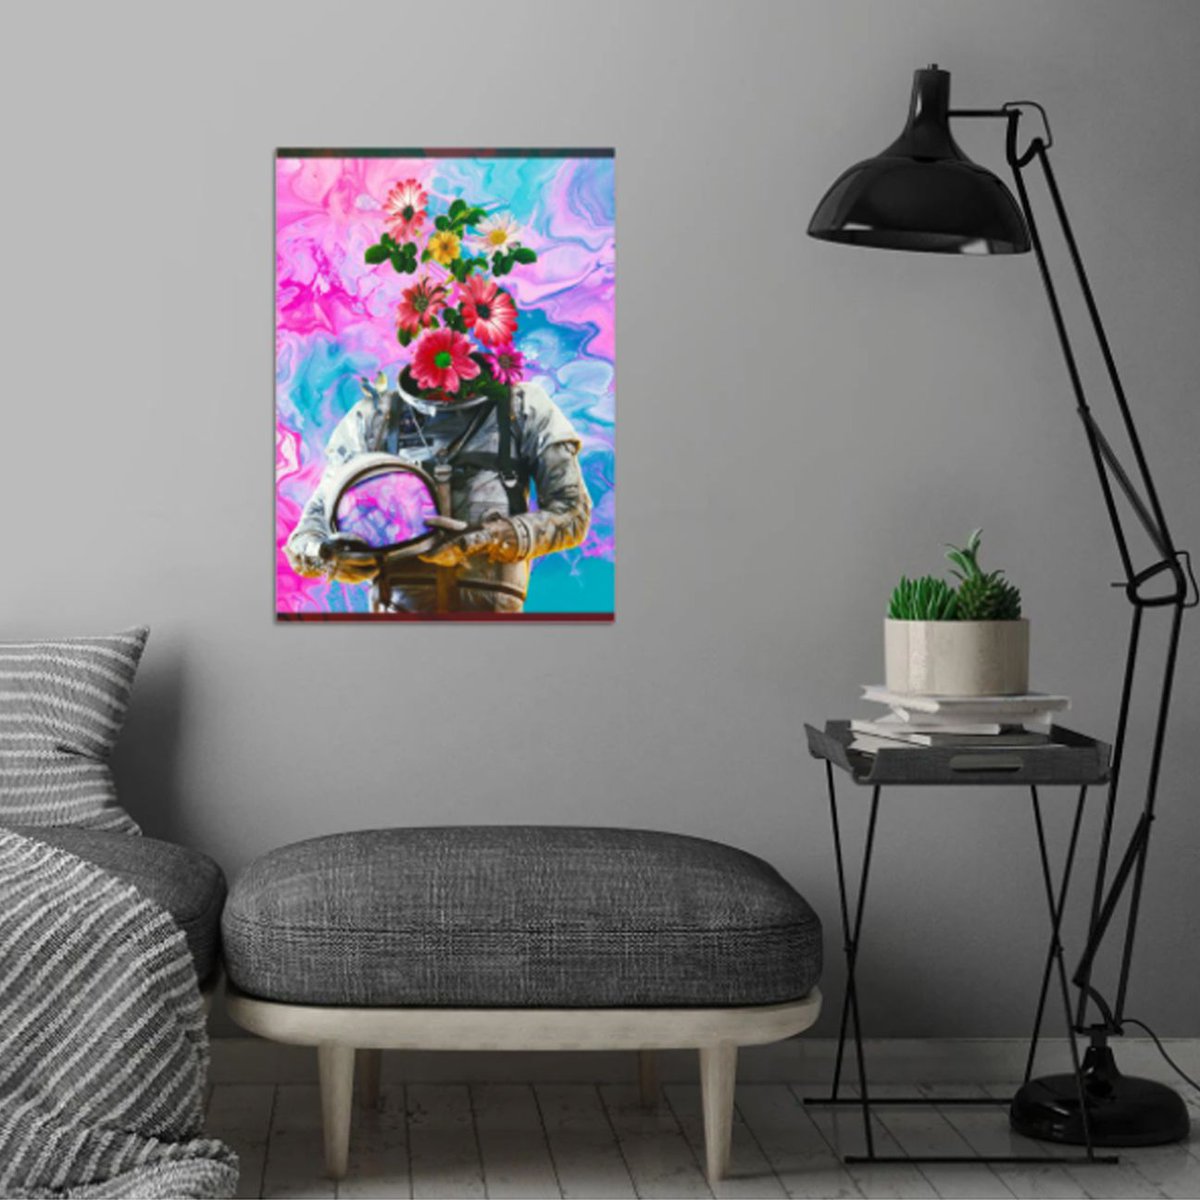 GET20 to get 20% on other matte & gloss posters | Ends: Soon @displate
buff.ly/2SCXcrW 
#art #seamlessoo #displate #metalprints